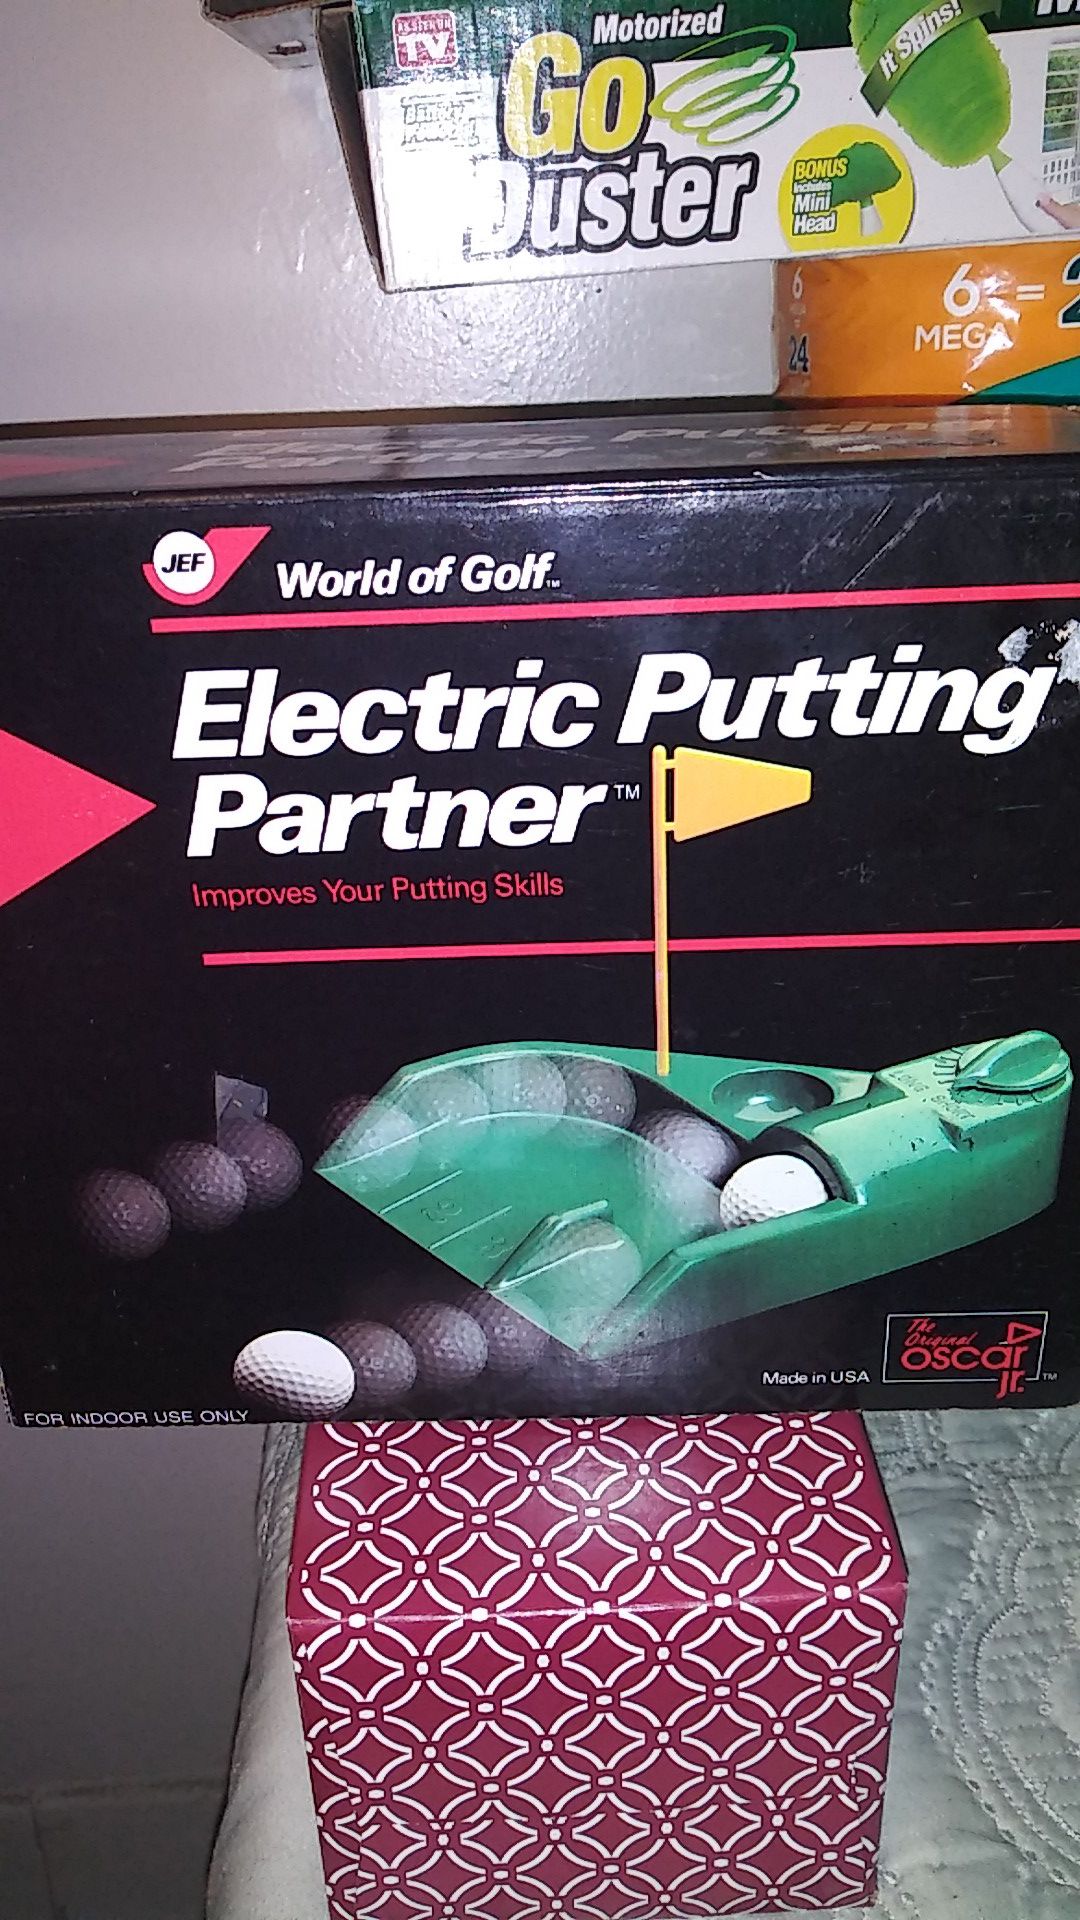 World of Golf electric putting partner improve your putting skills